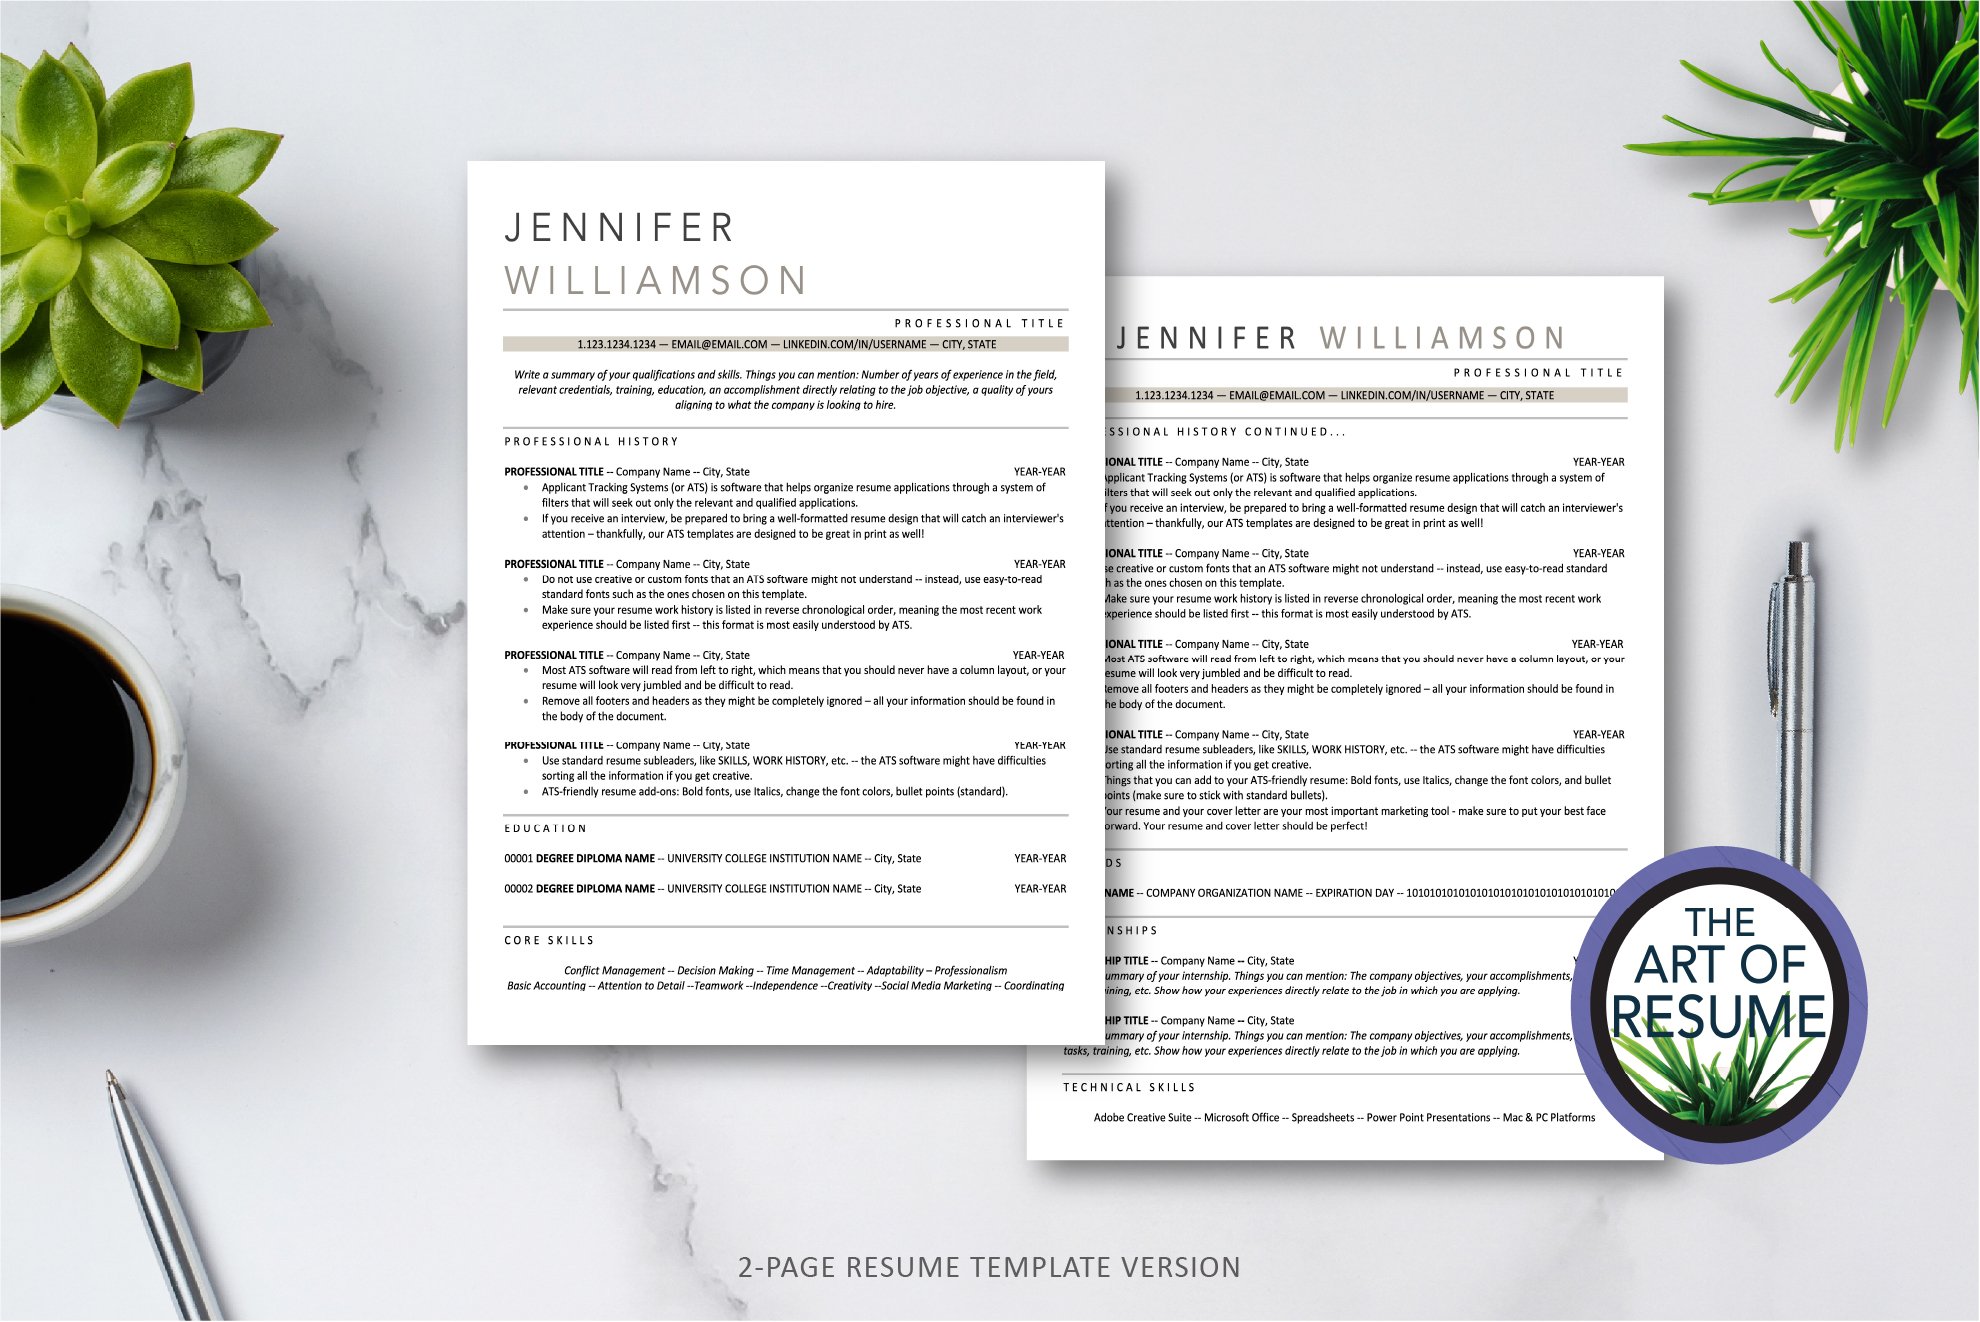 3 two resume template 749